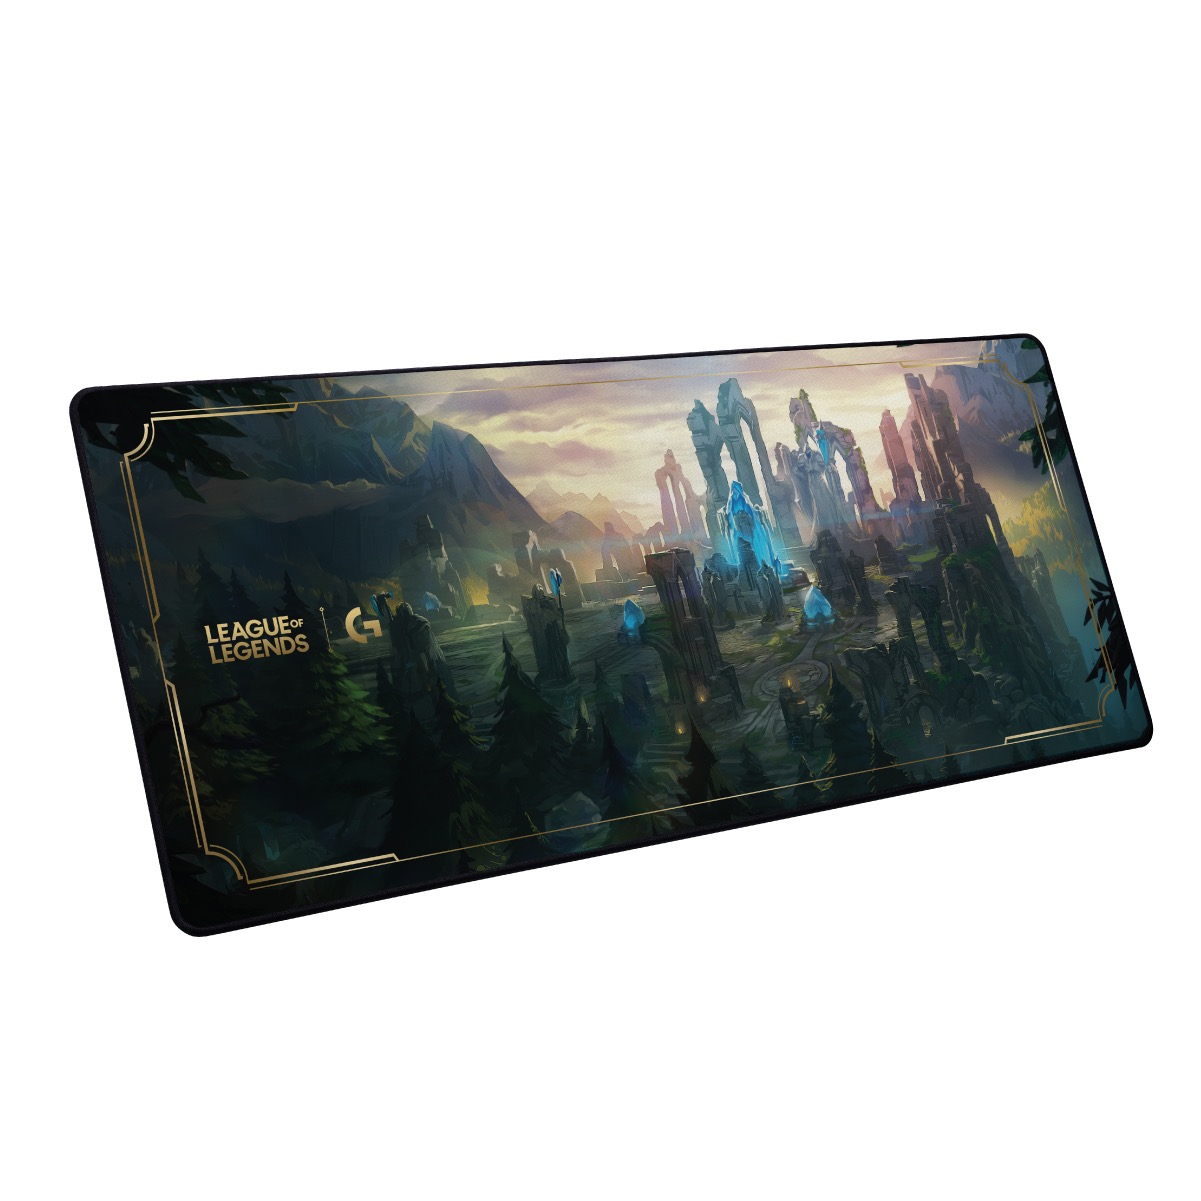 Logitech G G840 XL Gaming Mouse Pad League of Legends Special Edition, , large image number 0